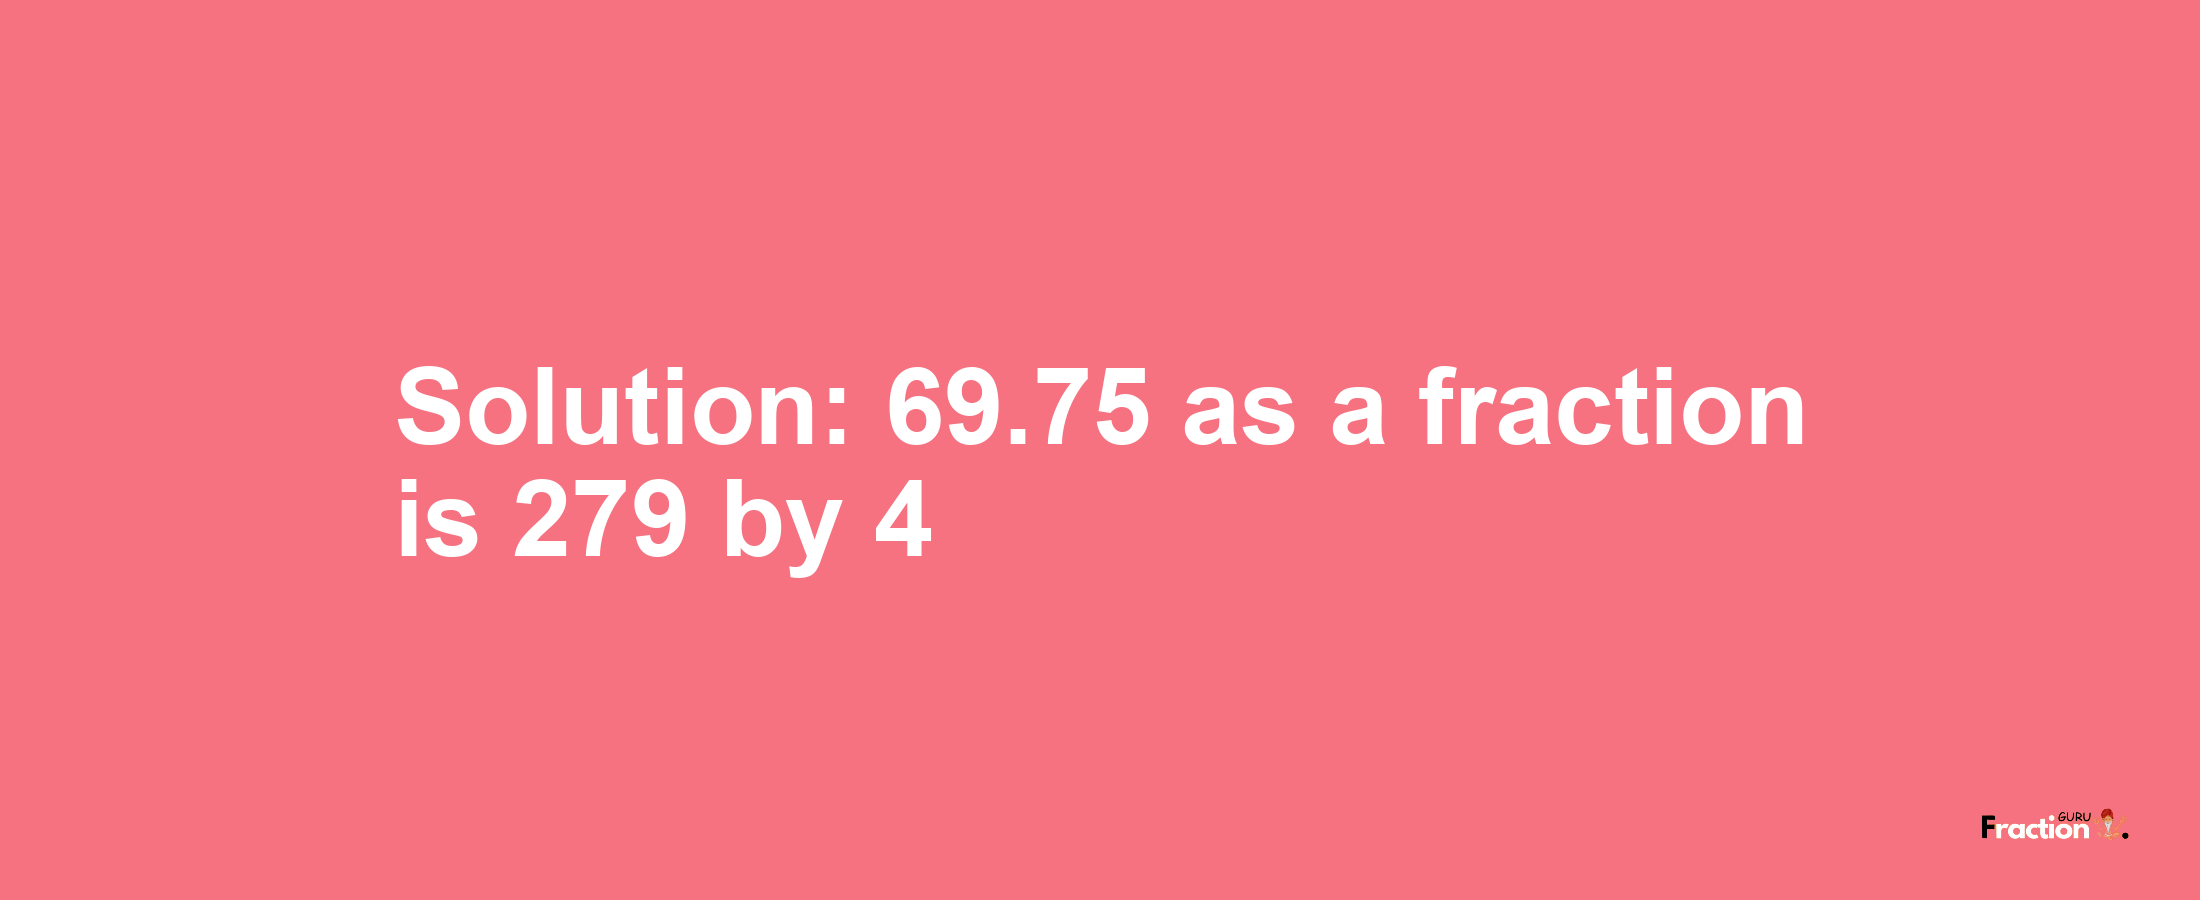 Solution:69.75 as a fraction is 279/4